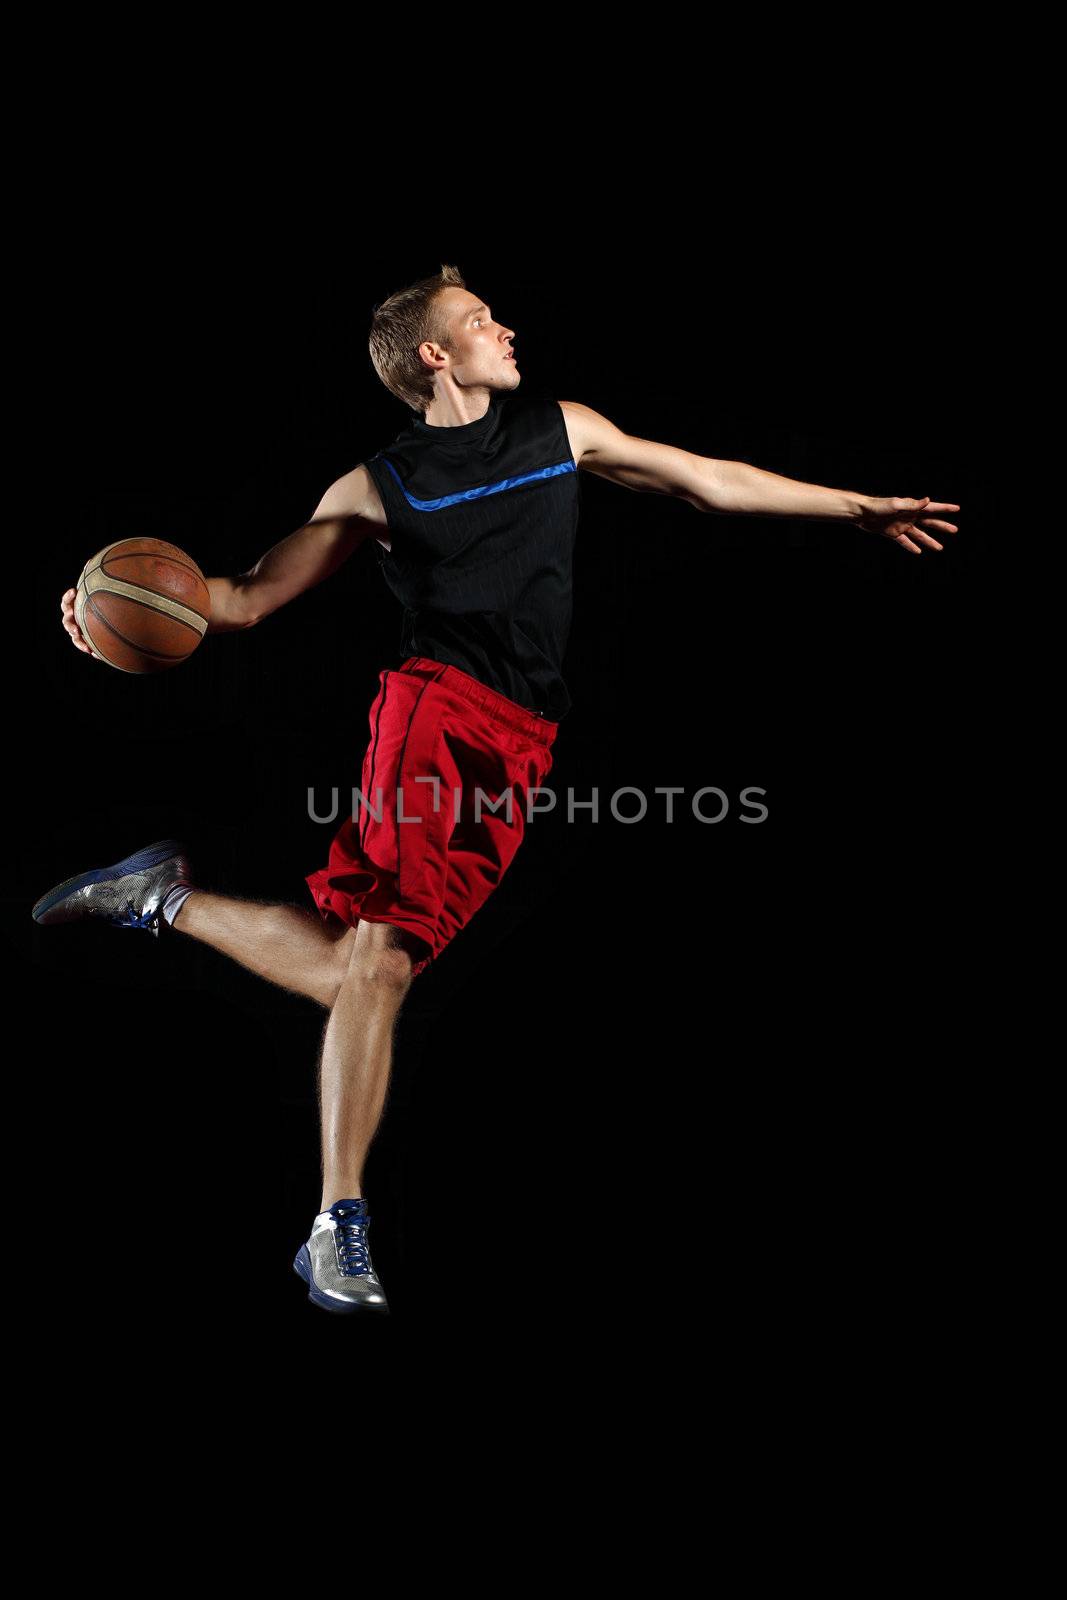 Basketball player with a ball by sergey_nivens